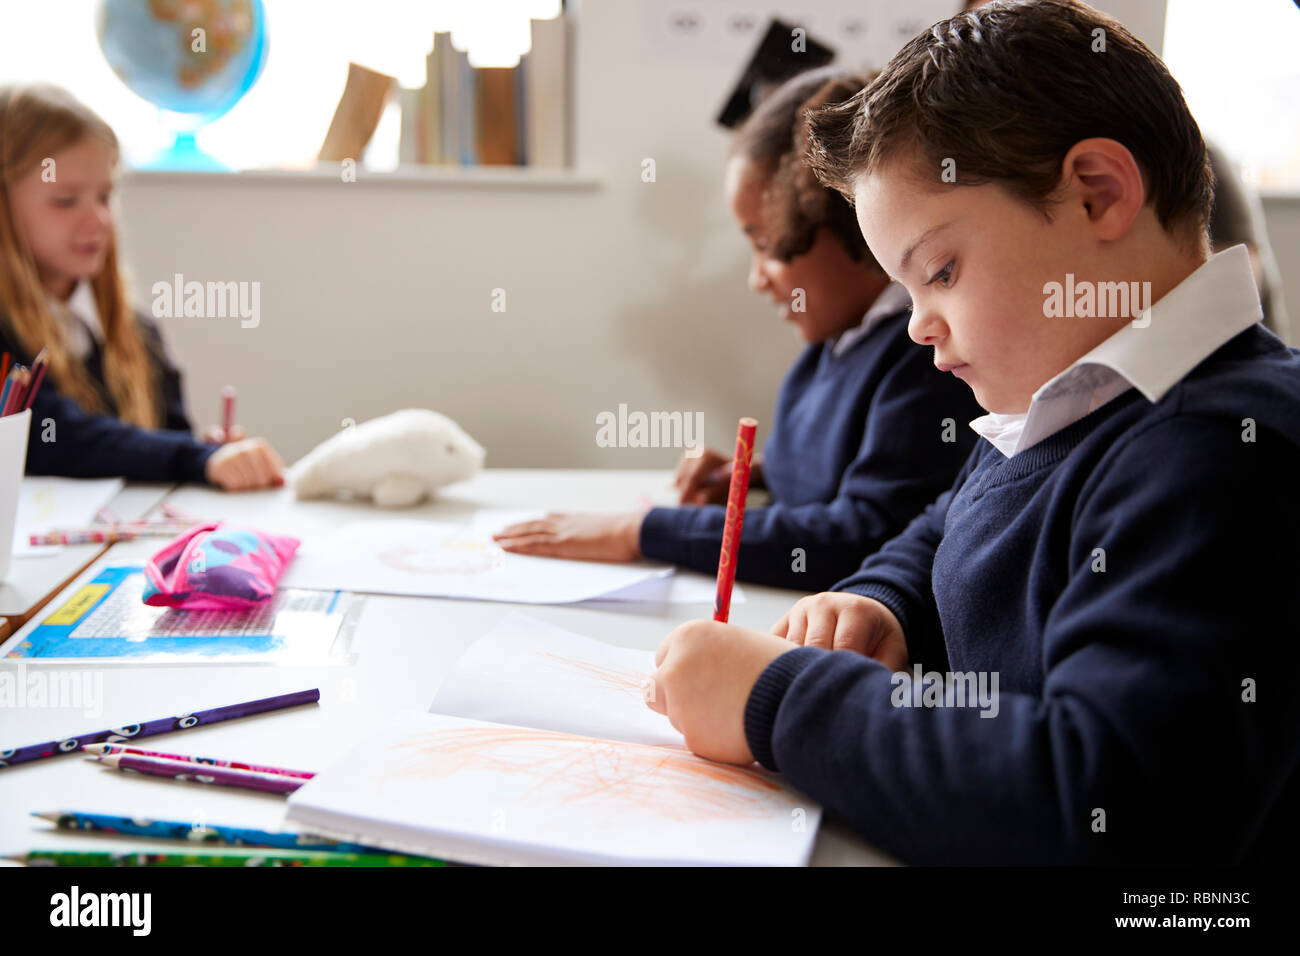 Pre-teen school boy with Down syndrome sitting at a desk writing in a primary school class, close up, side view Stock Photo